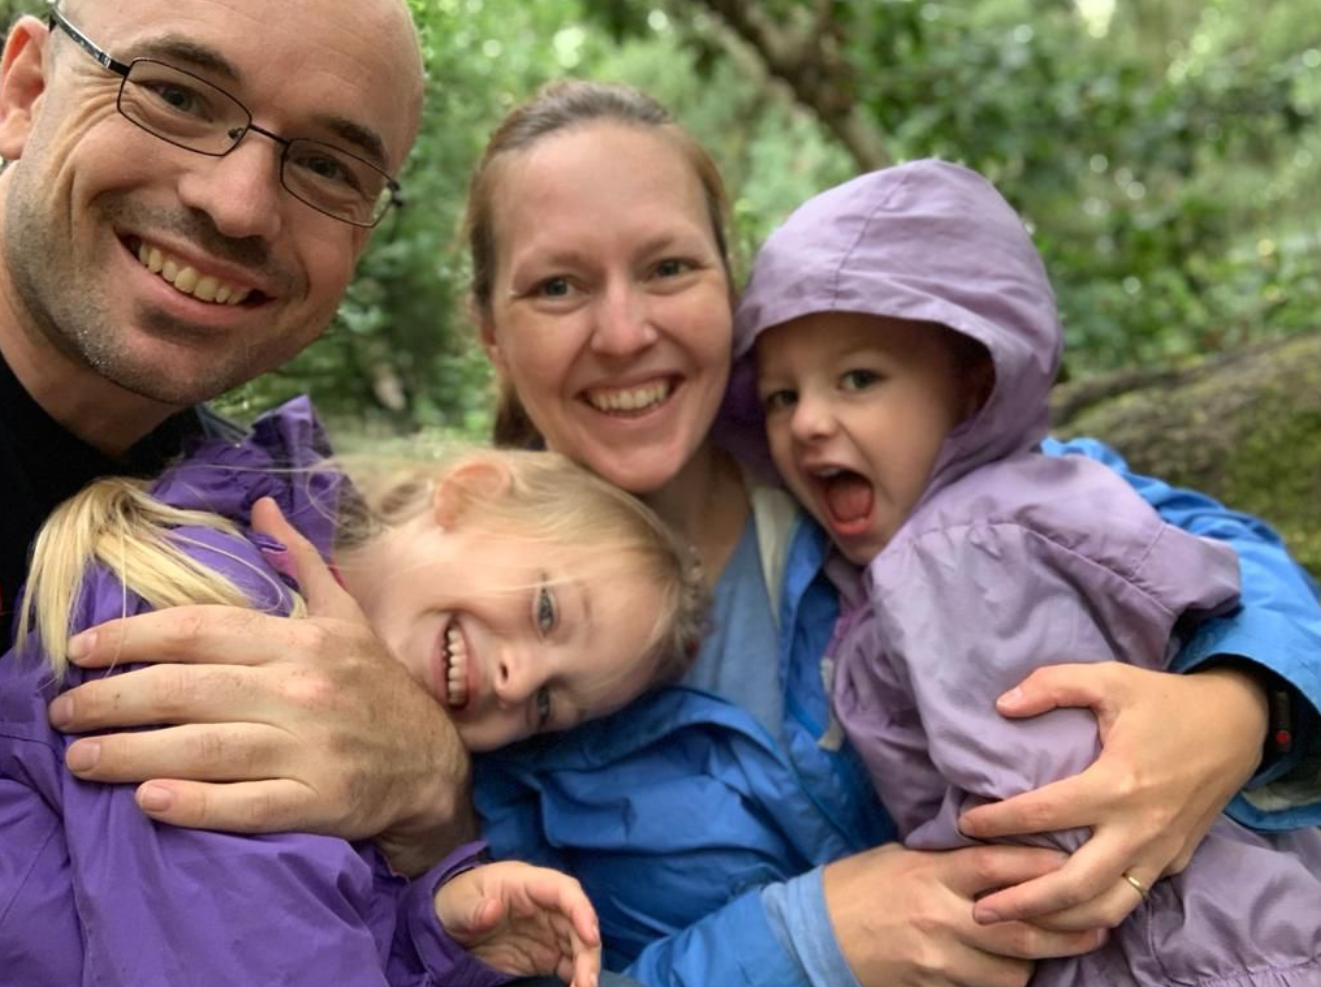 Family photo in a rainy forest